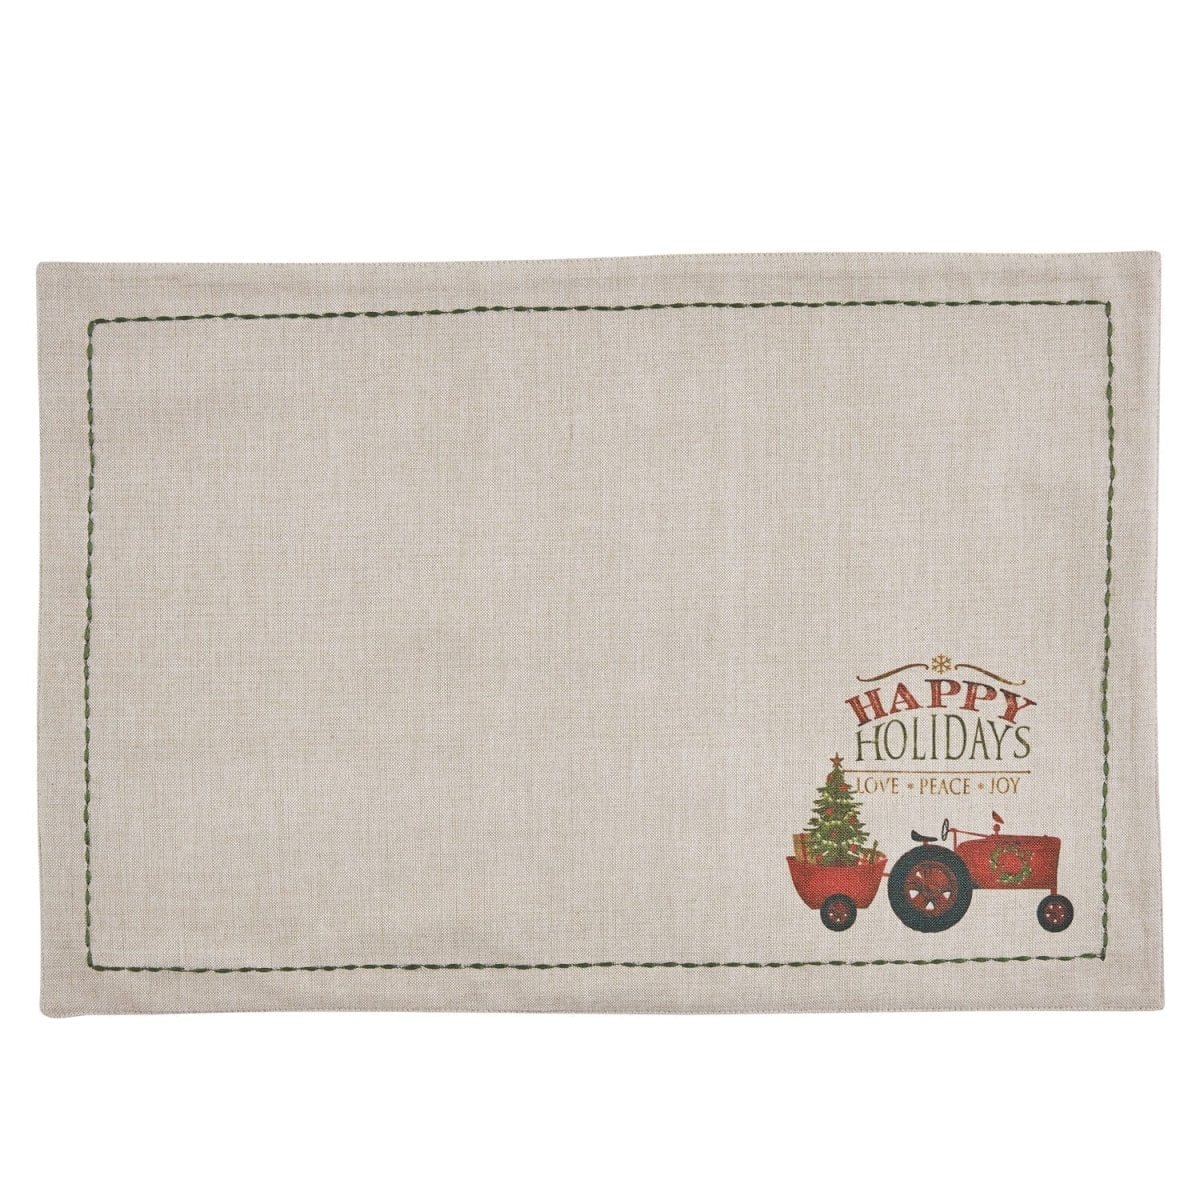 Over the River Printed Tractor Placemat-Park Designs-The Village Merchant